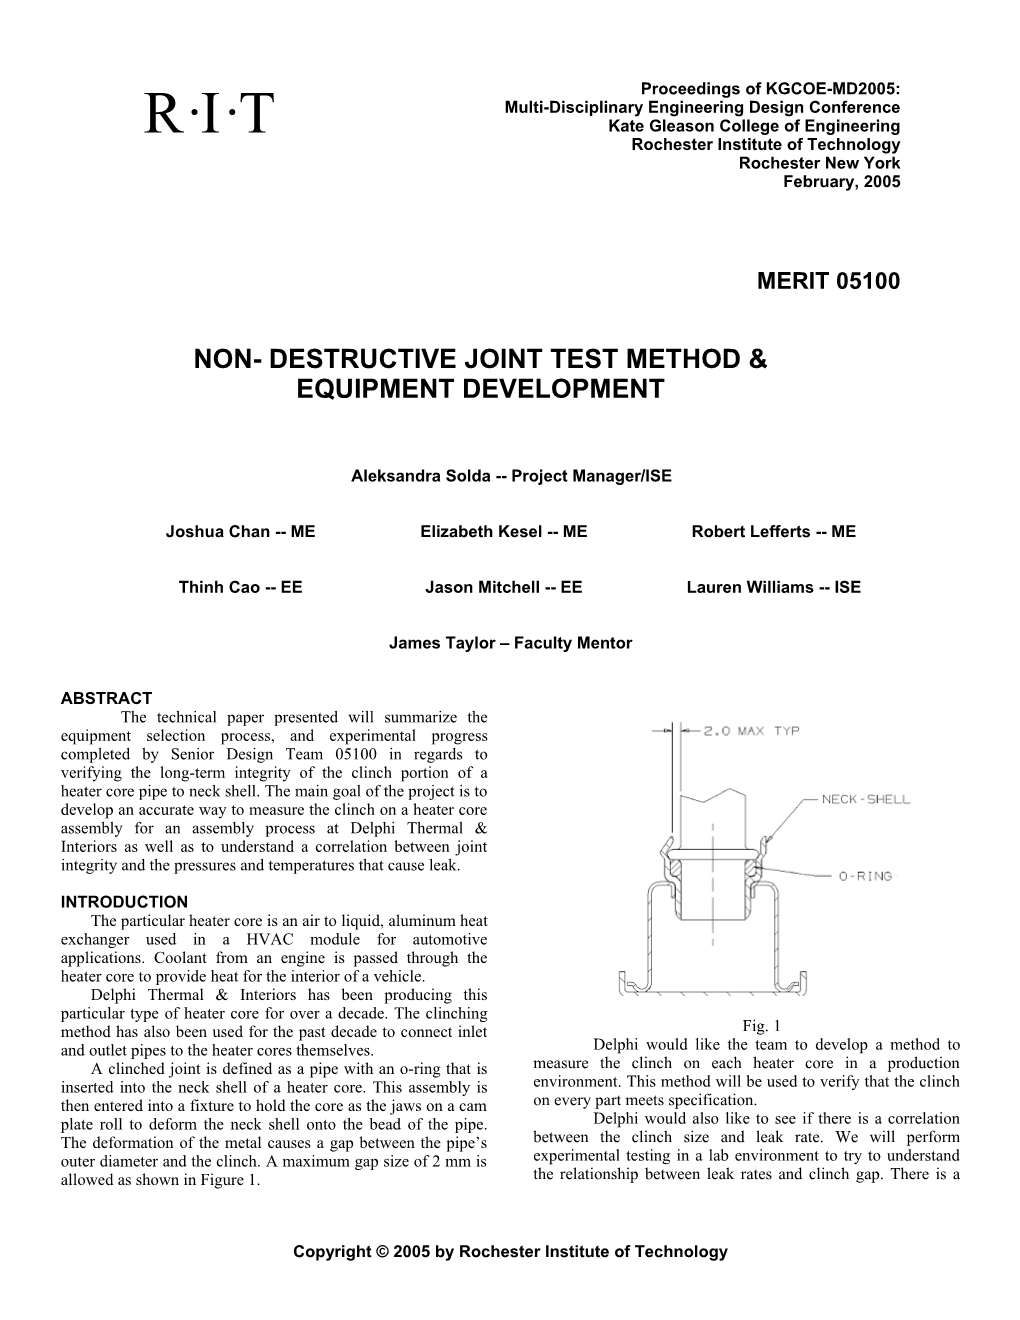 Proceedings of KGCOE-MD2004: Multi-Disciplinary Engineering Design Conference Page 5